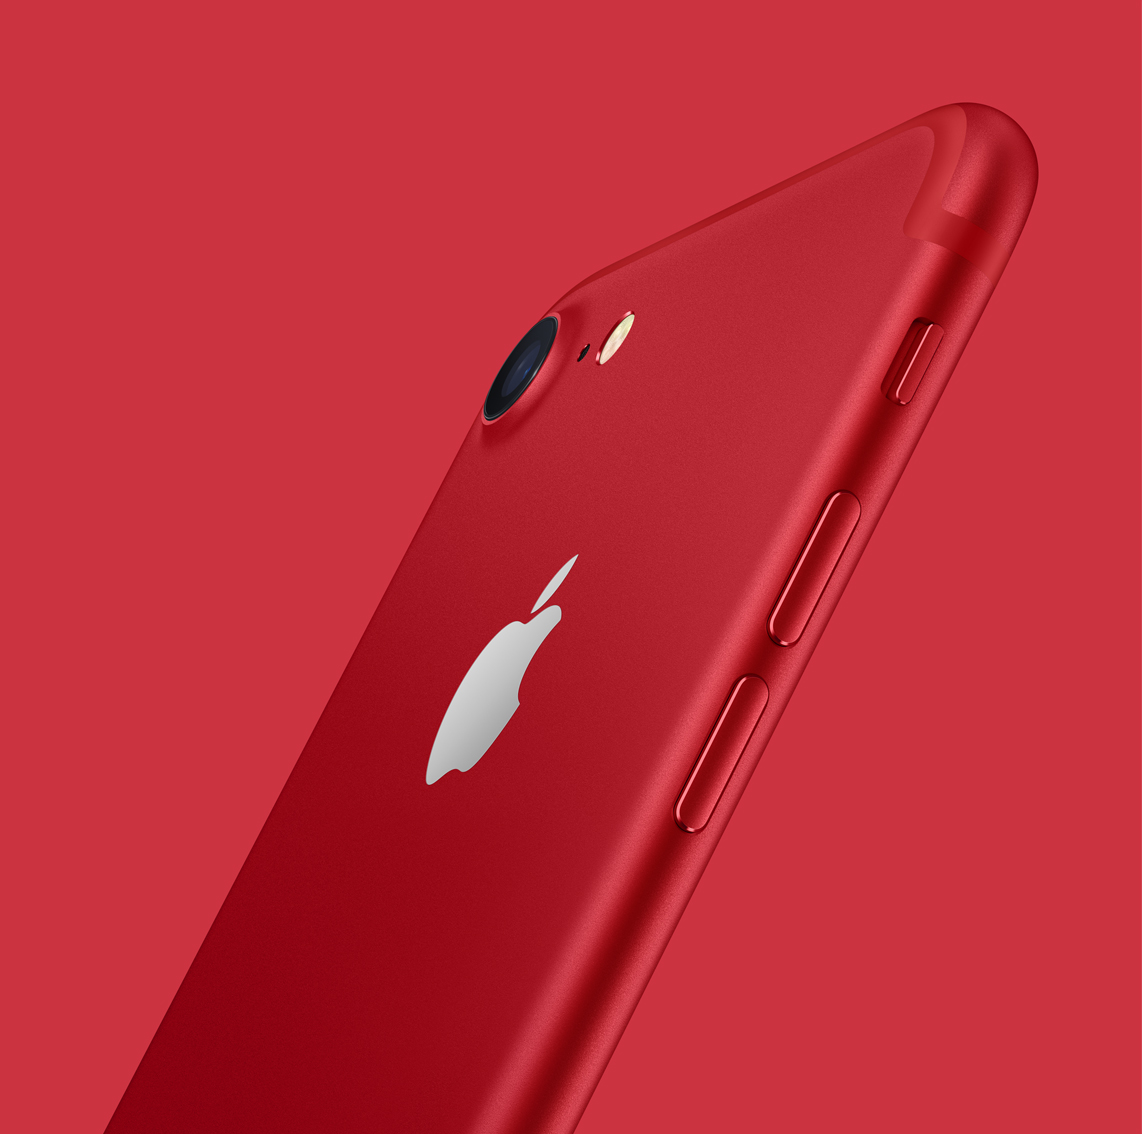 Iphone 7 Plus Red Limited Edition - HD Wallpaper 